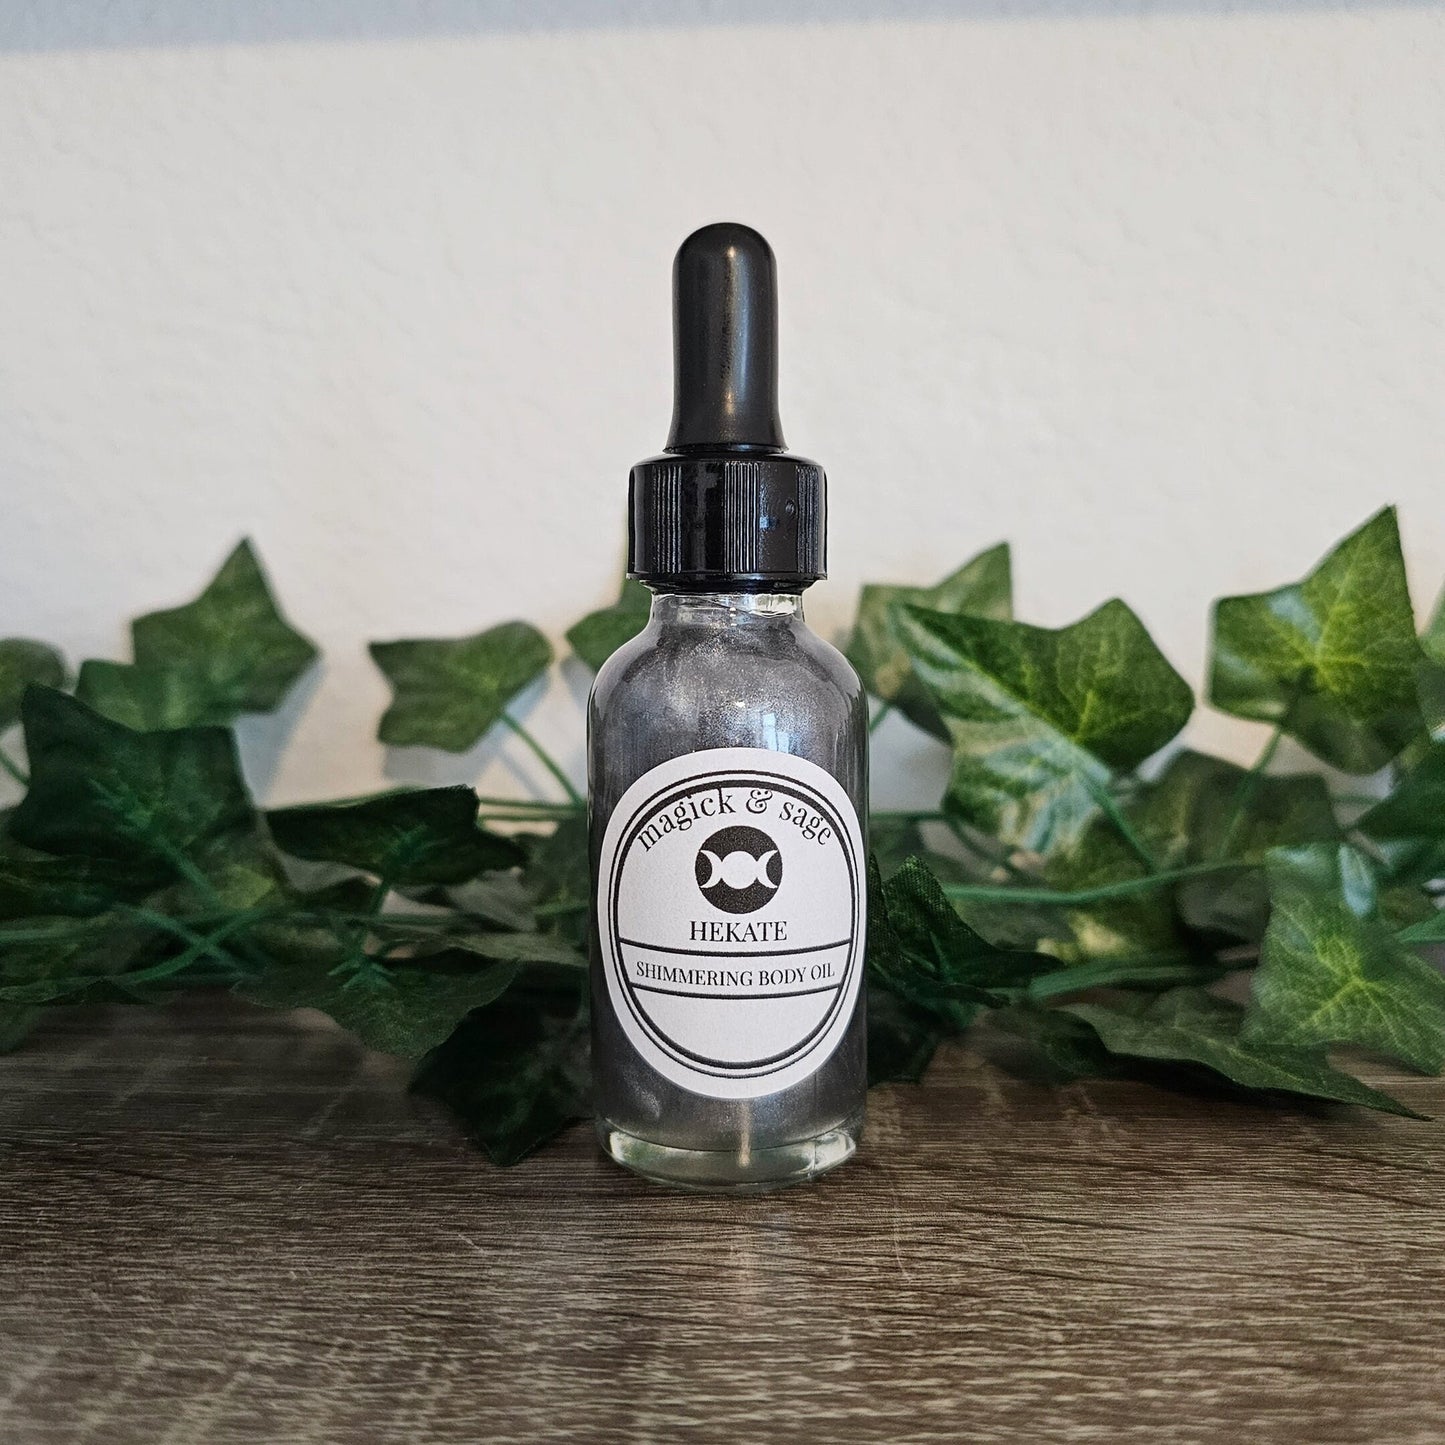 HEKATE's Shimmering Body Oil - hydrate, moisturize, and embody Hecate's energy - Customizable - Magickal Massage, Bath, & Body Oil